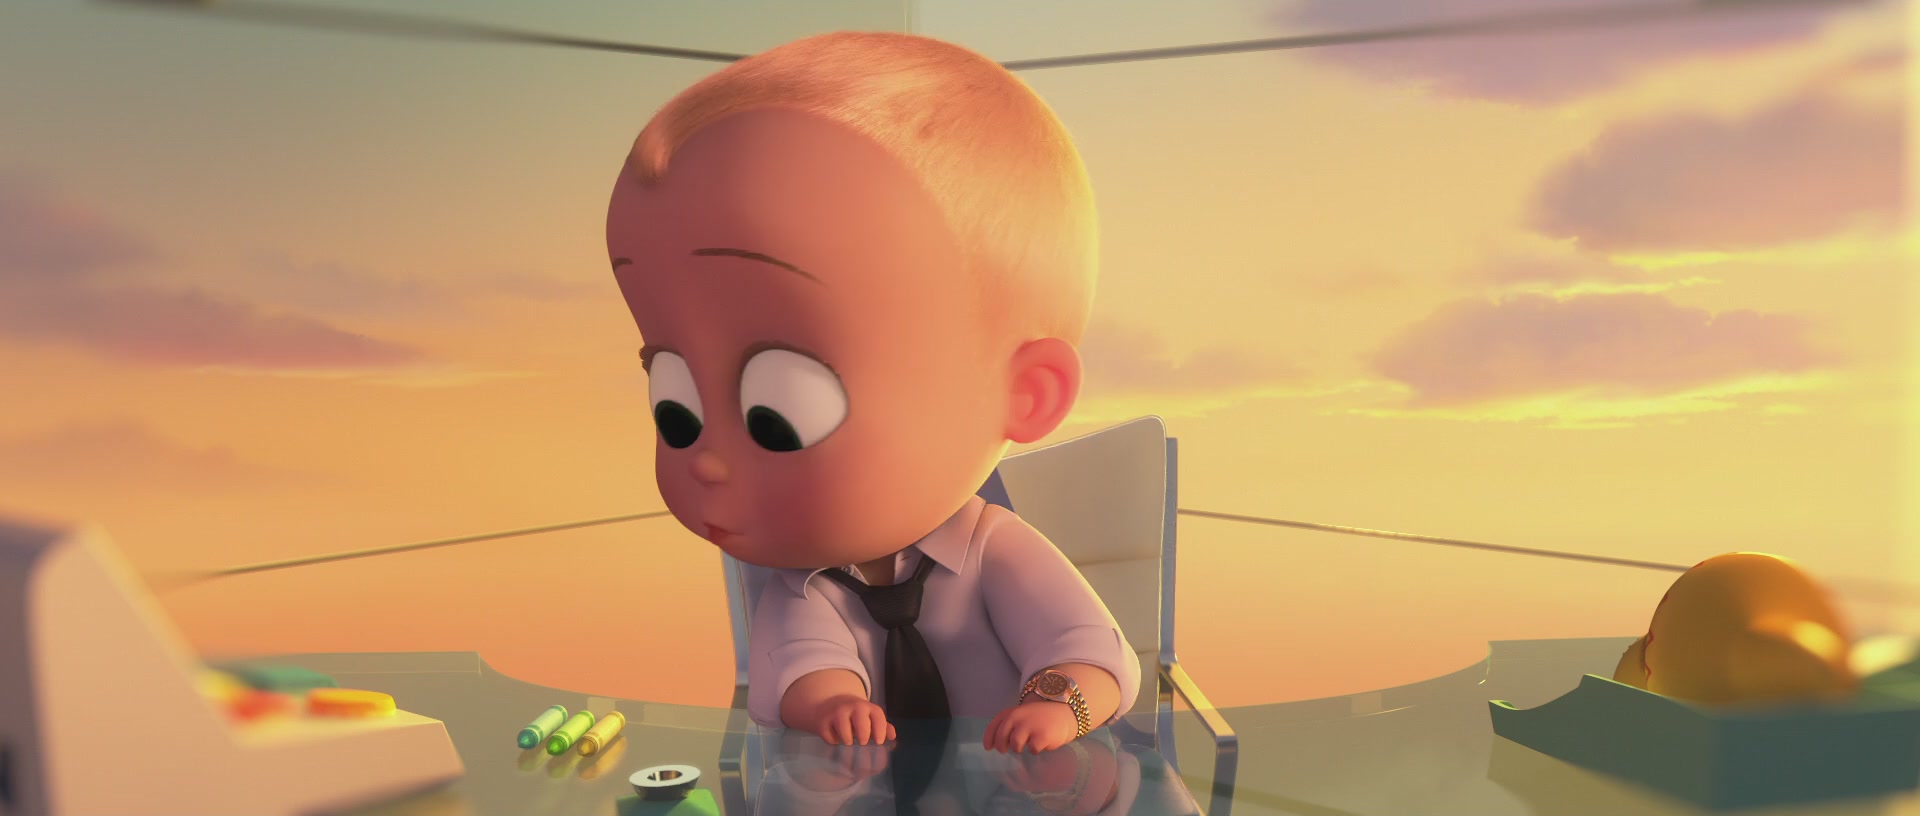 Watch Free Movies Online: The Boss Baby